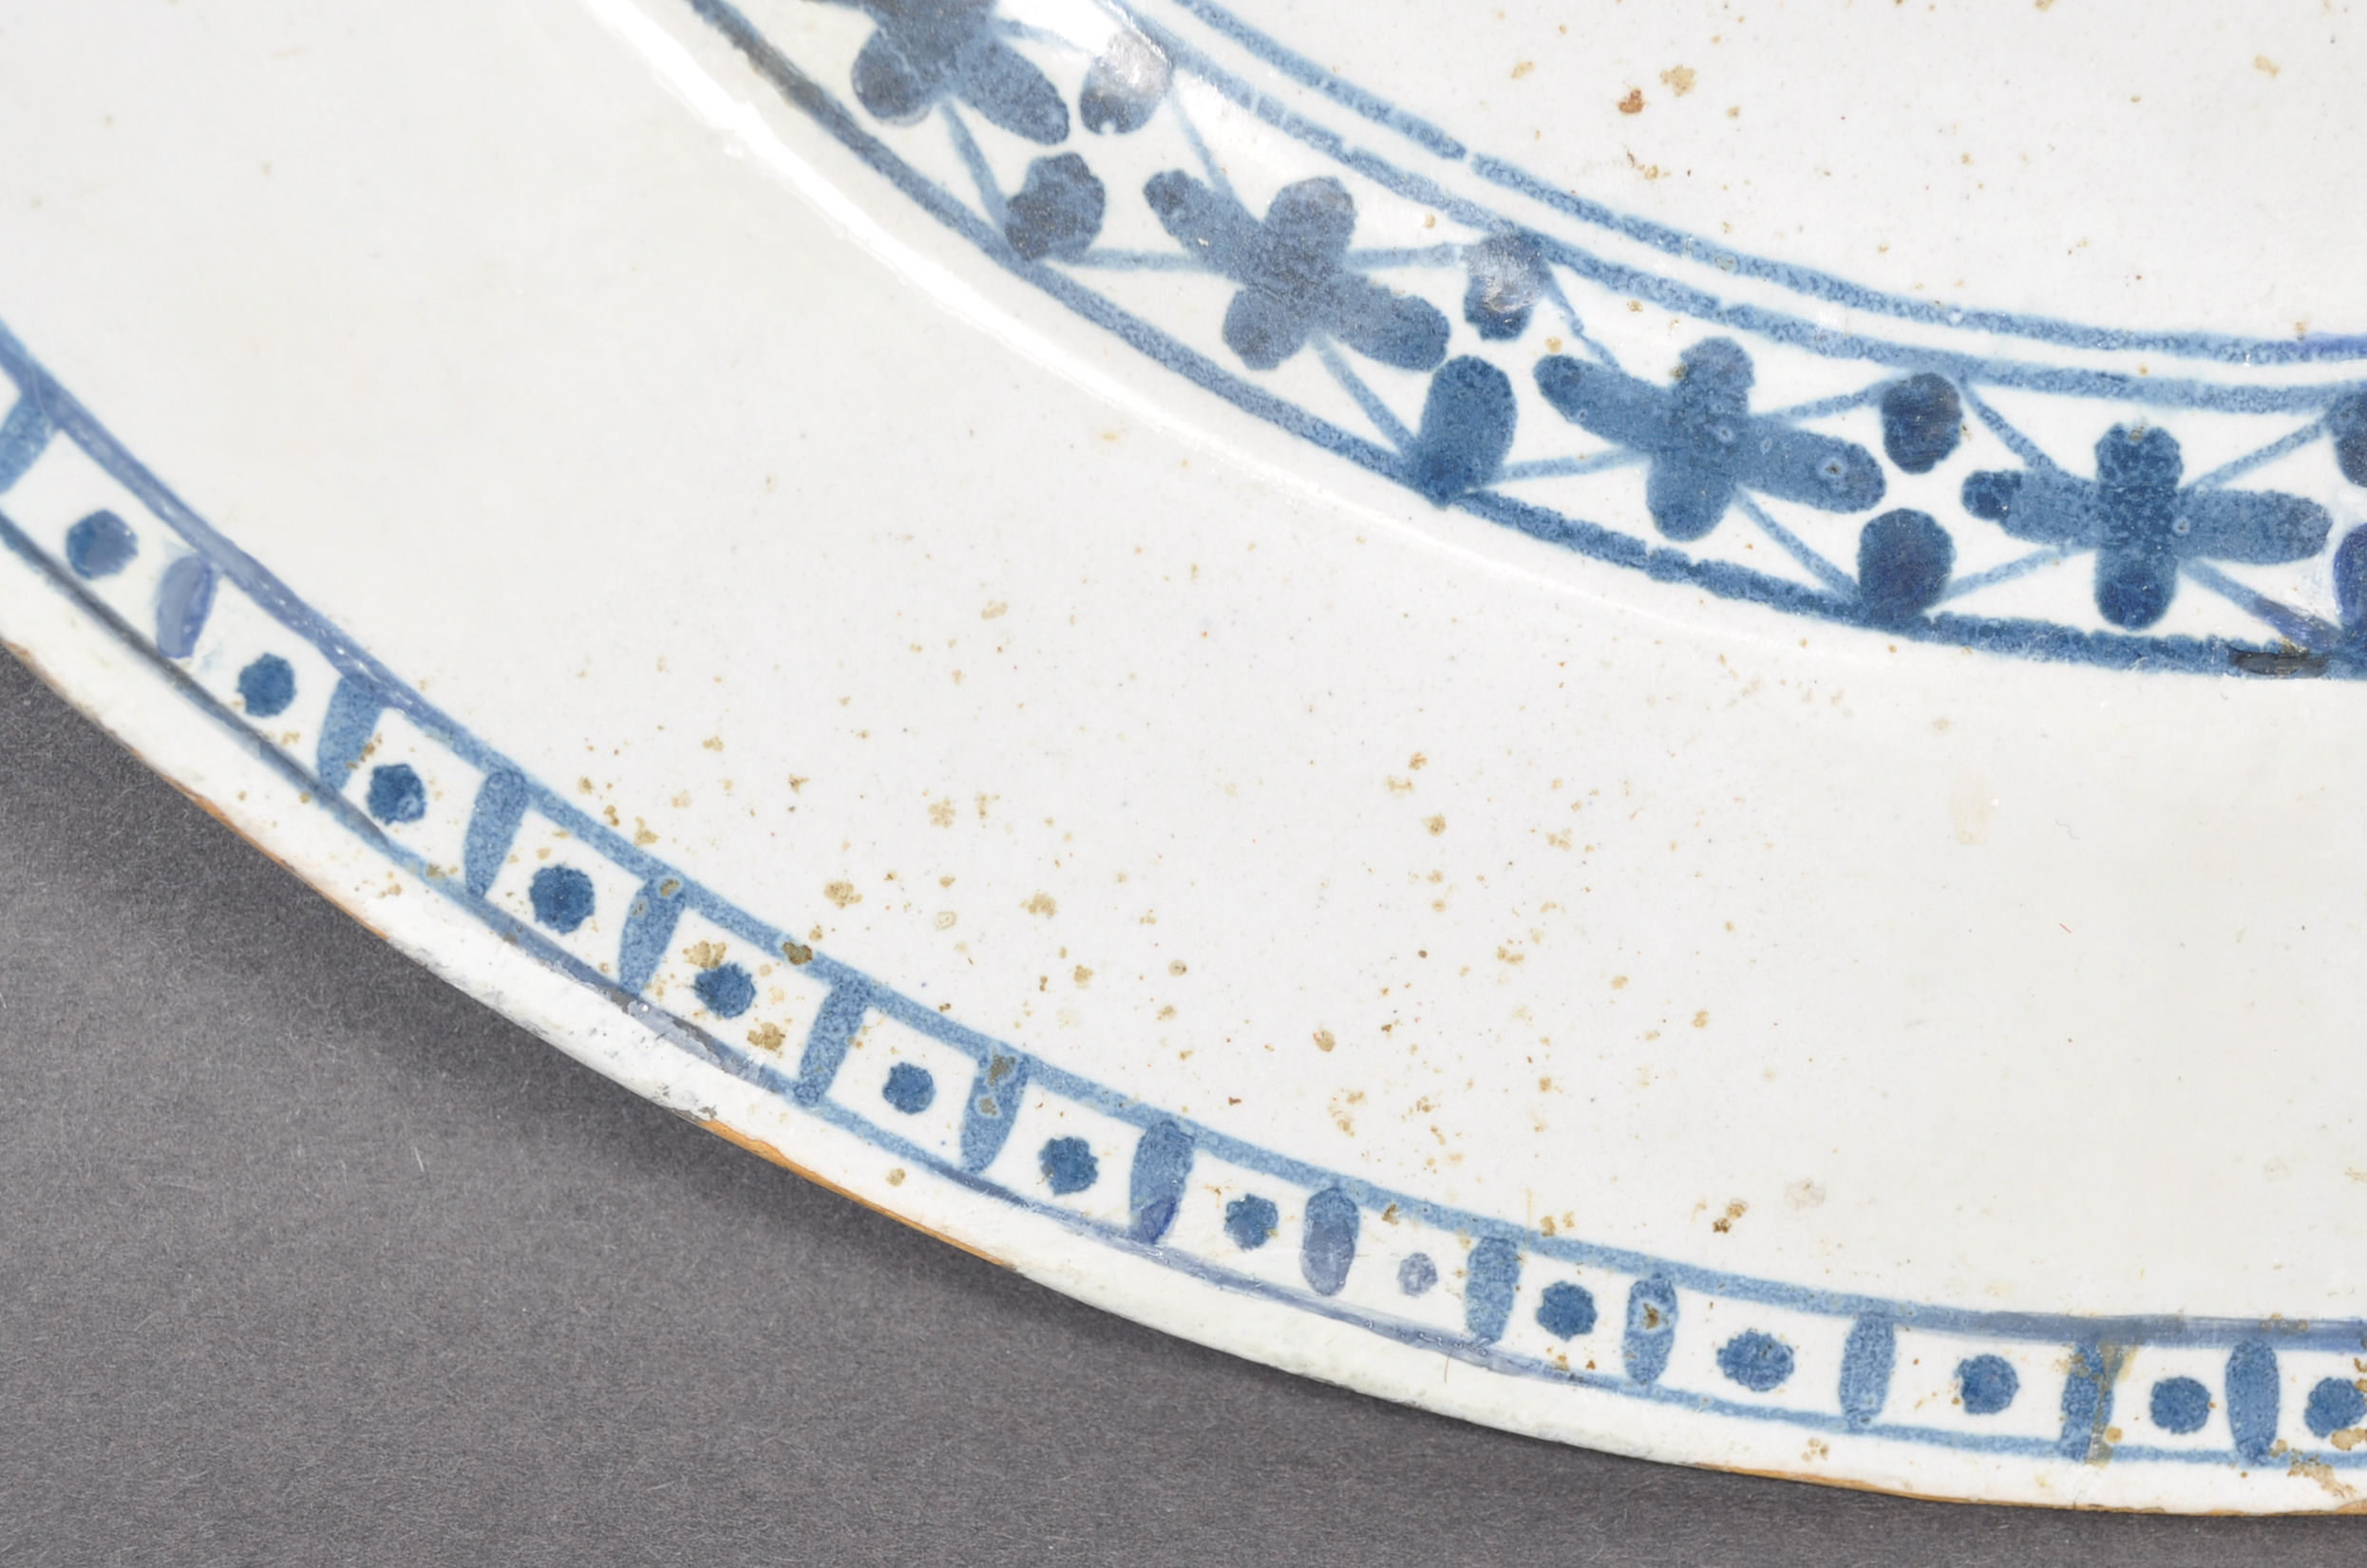 MID 18TH CENTURY ENGLISH DELFT BRISTOL CHARGER PLATE - Image 3 of 4